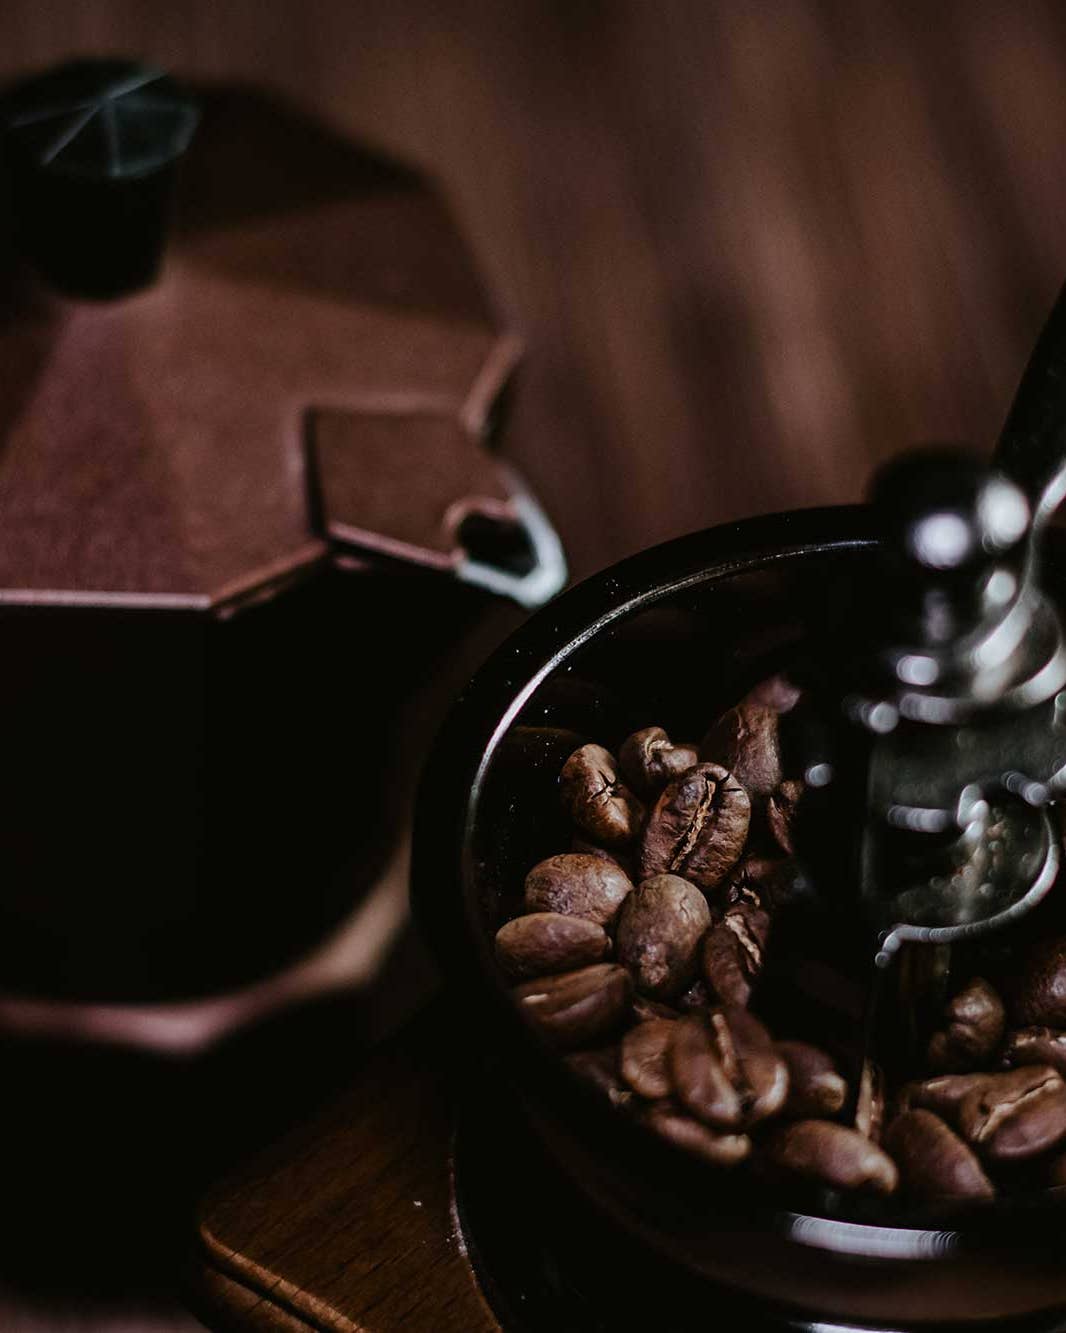 Our Guide To Basics of Unplugged Coffee Making: The Best Manual Coffee Grinder